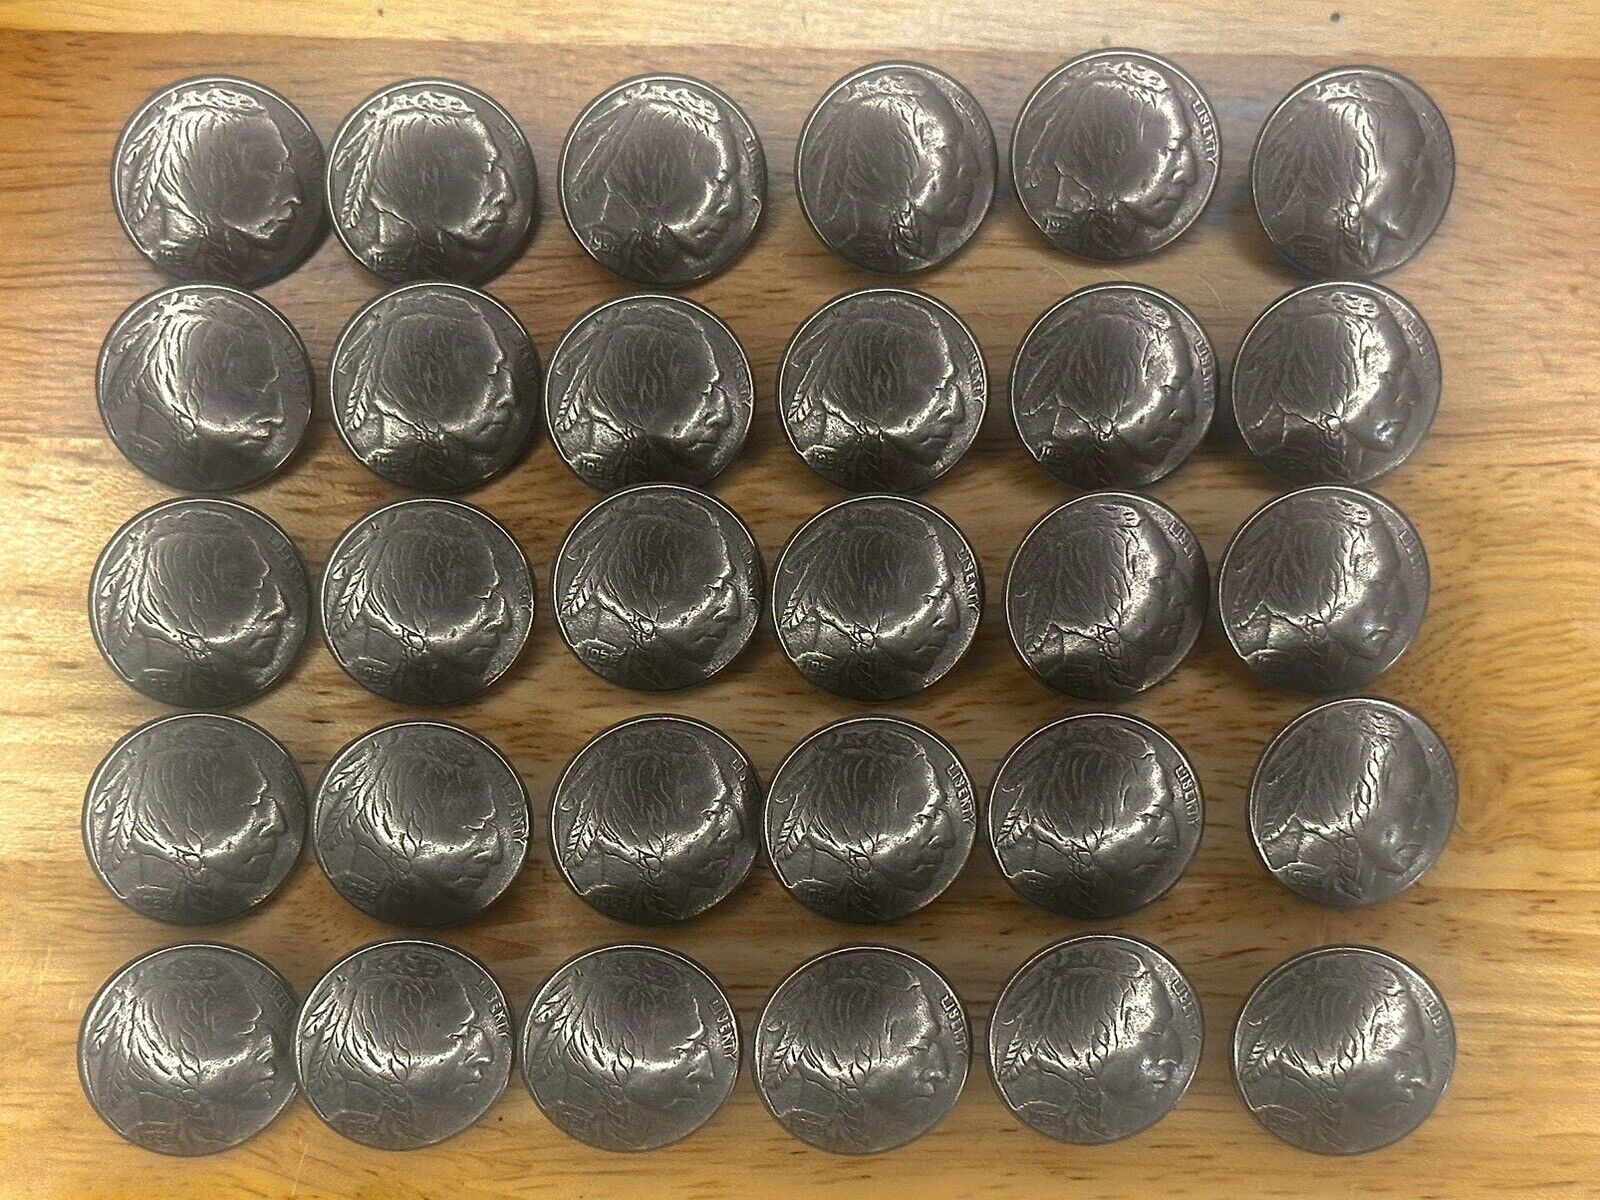 30X All Indian Head Nickel Domed Shank Coin Buttons 3/4